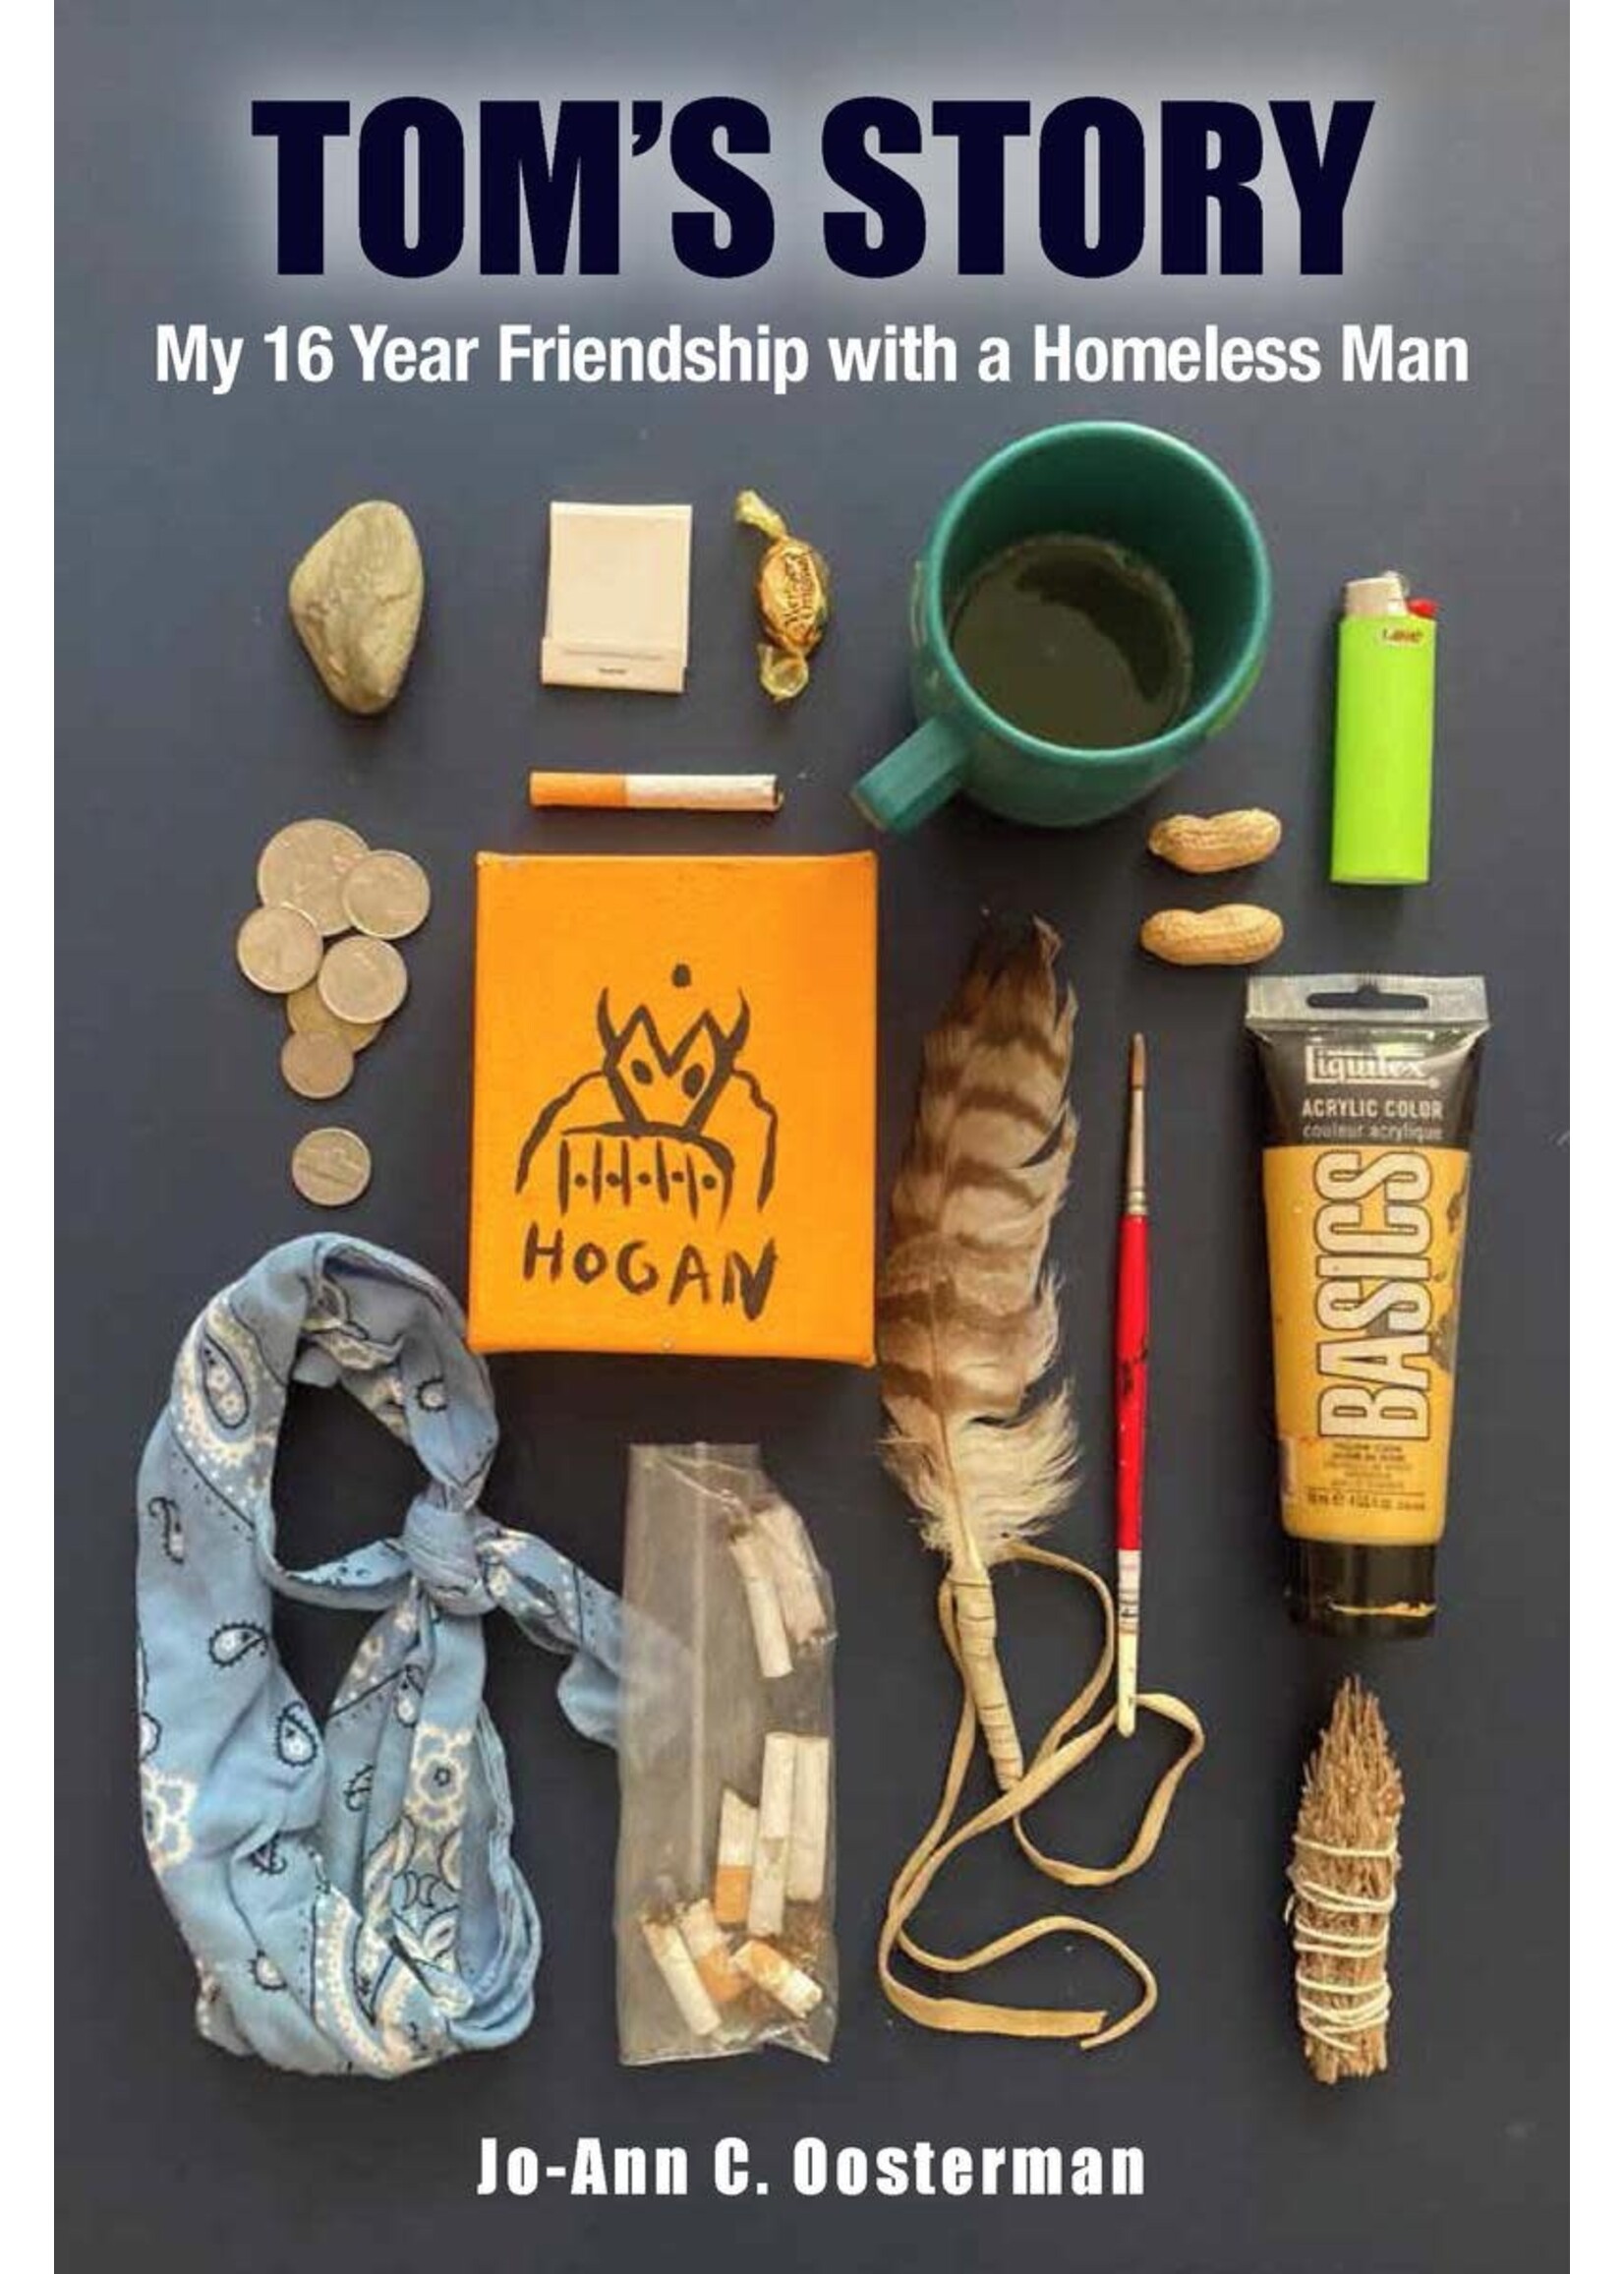 Tom's Story: My 16 Year Friendship with a Homeless Man by Jo-Ann Oosterman